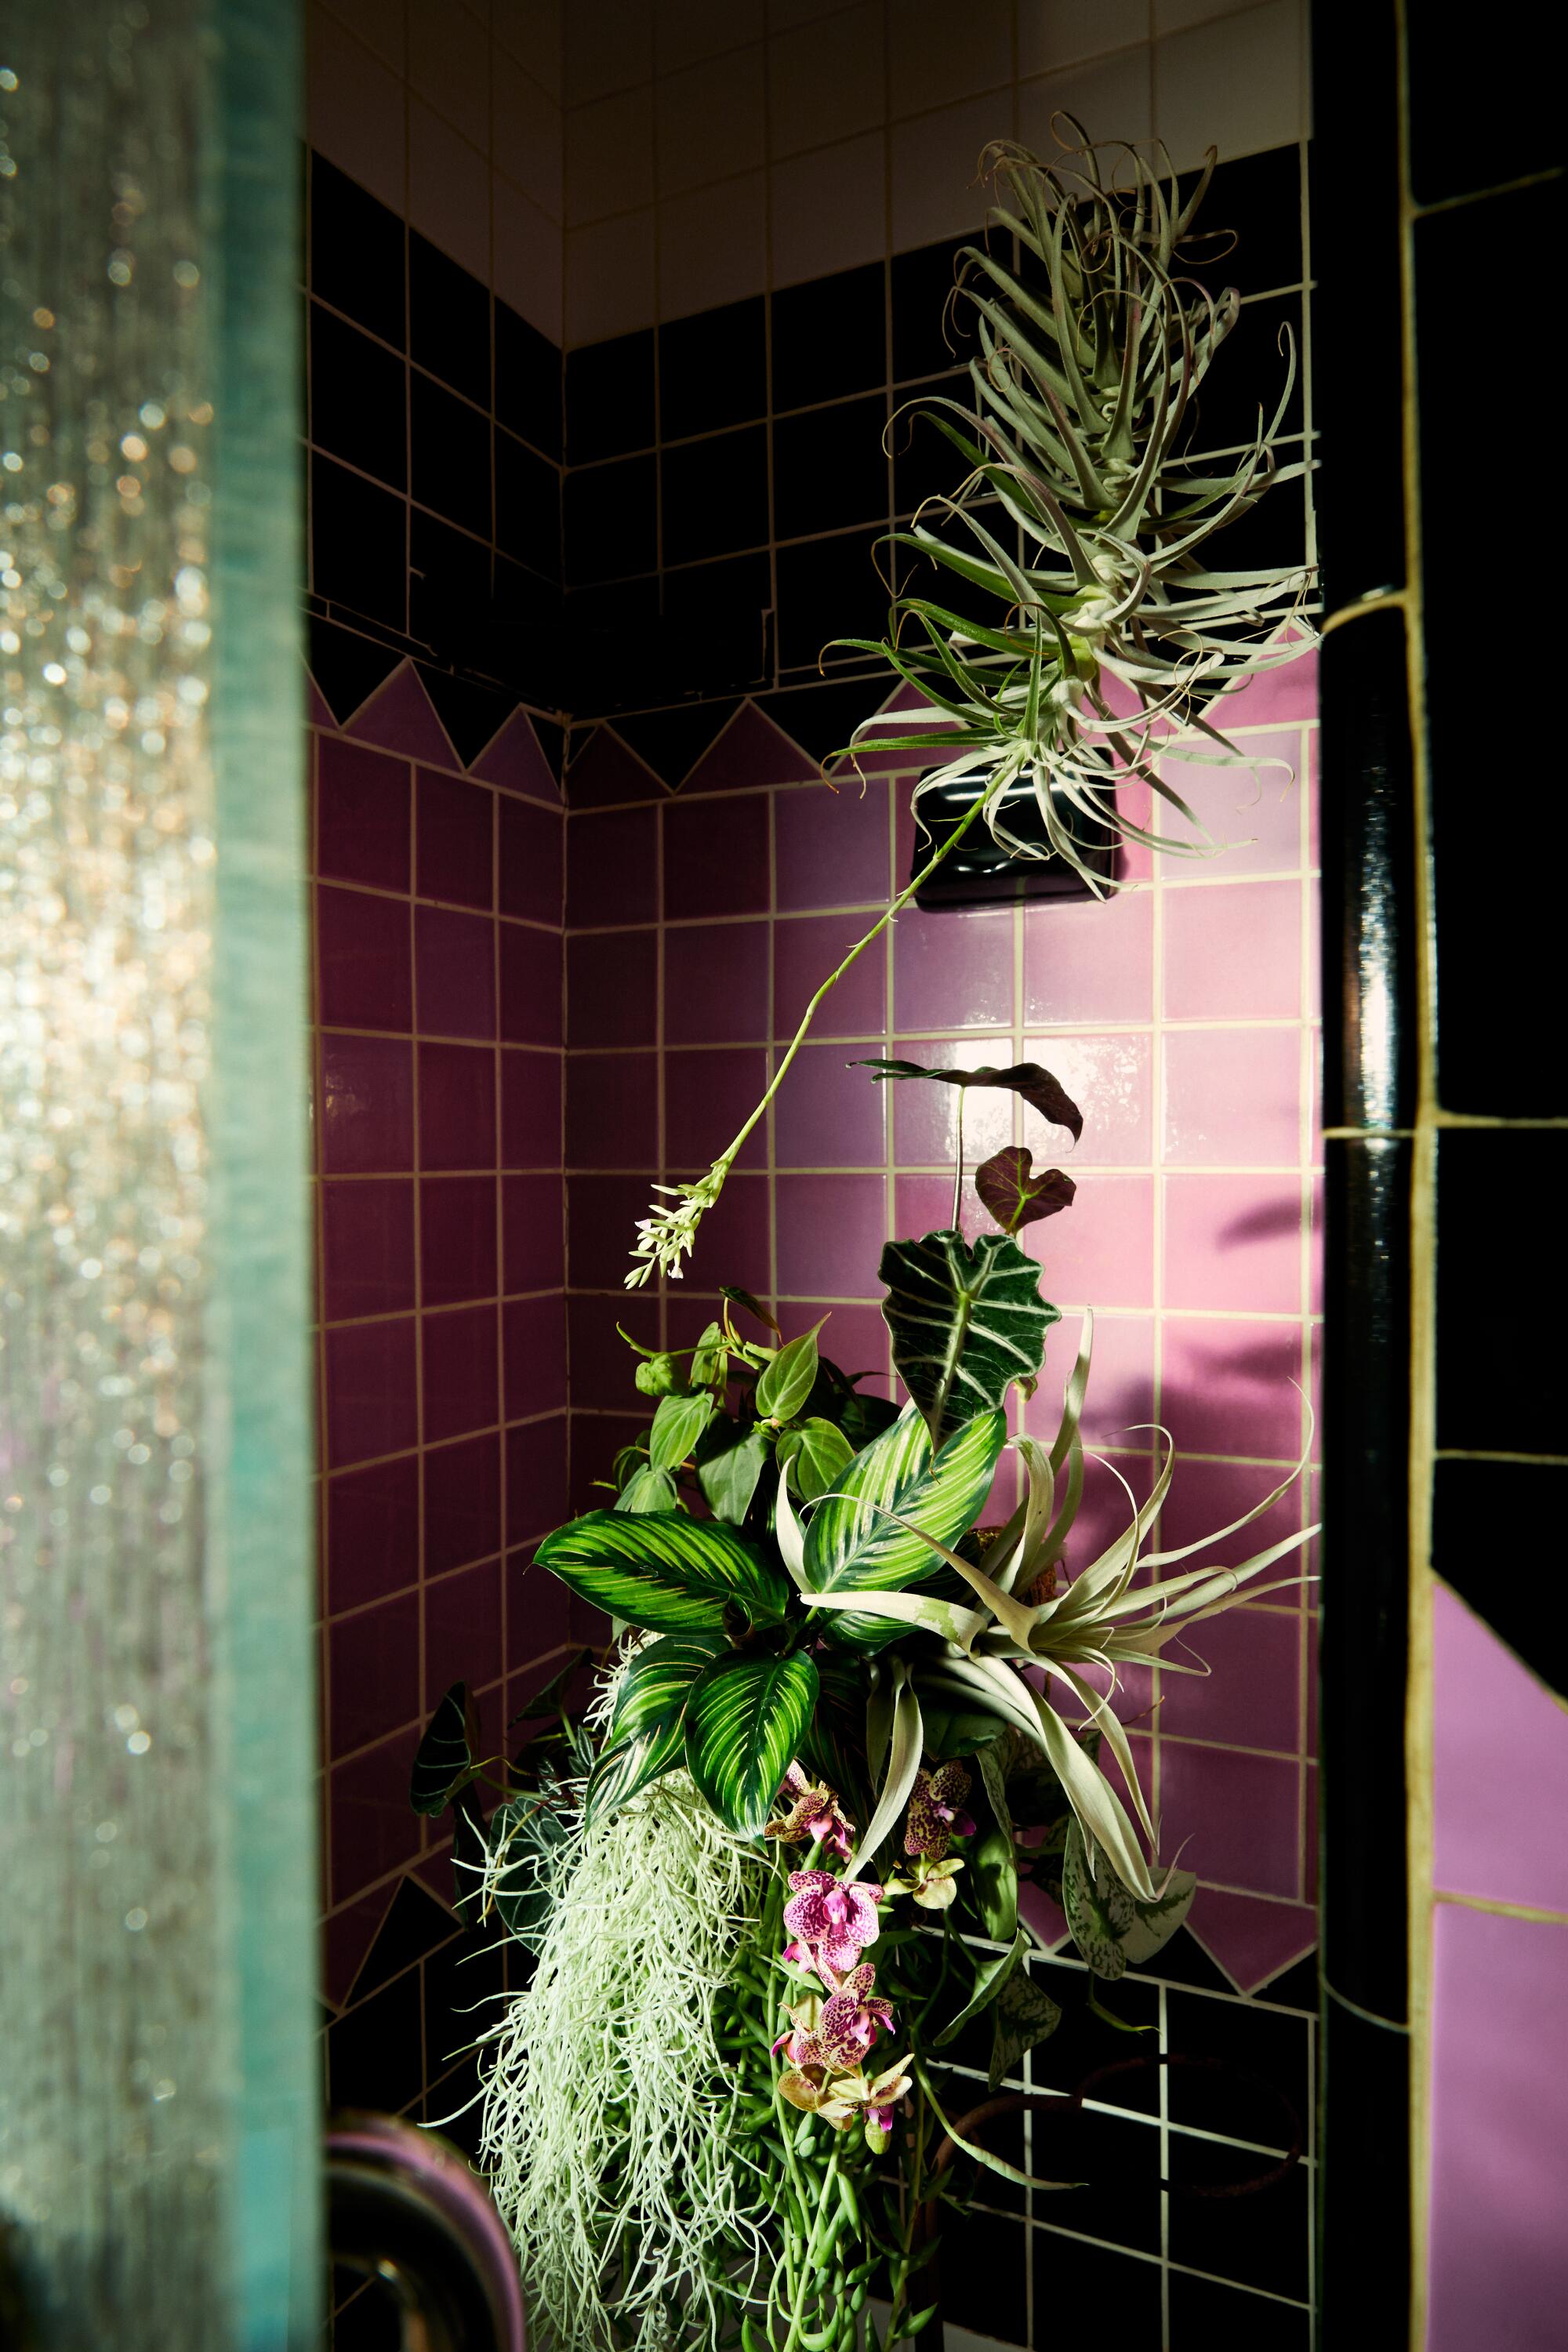 Plants are installed as an art piece in a tiled bathroom.